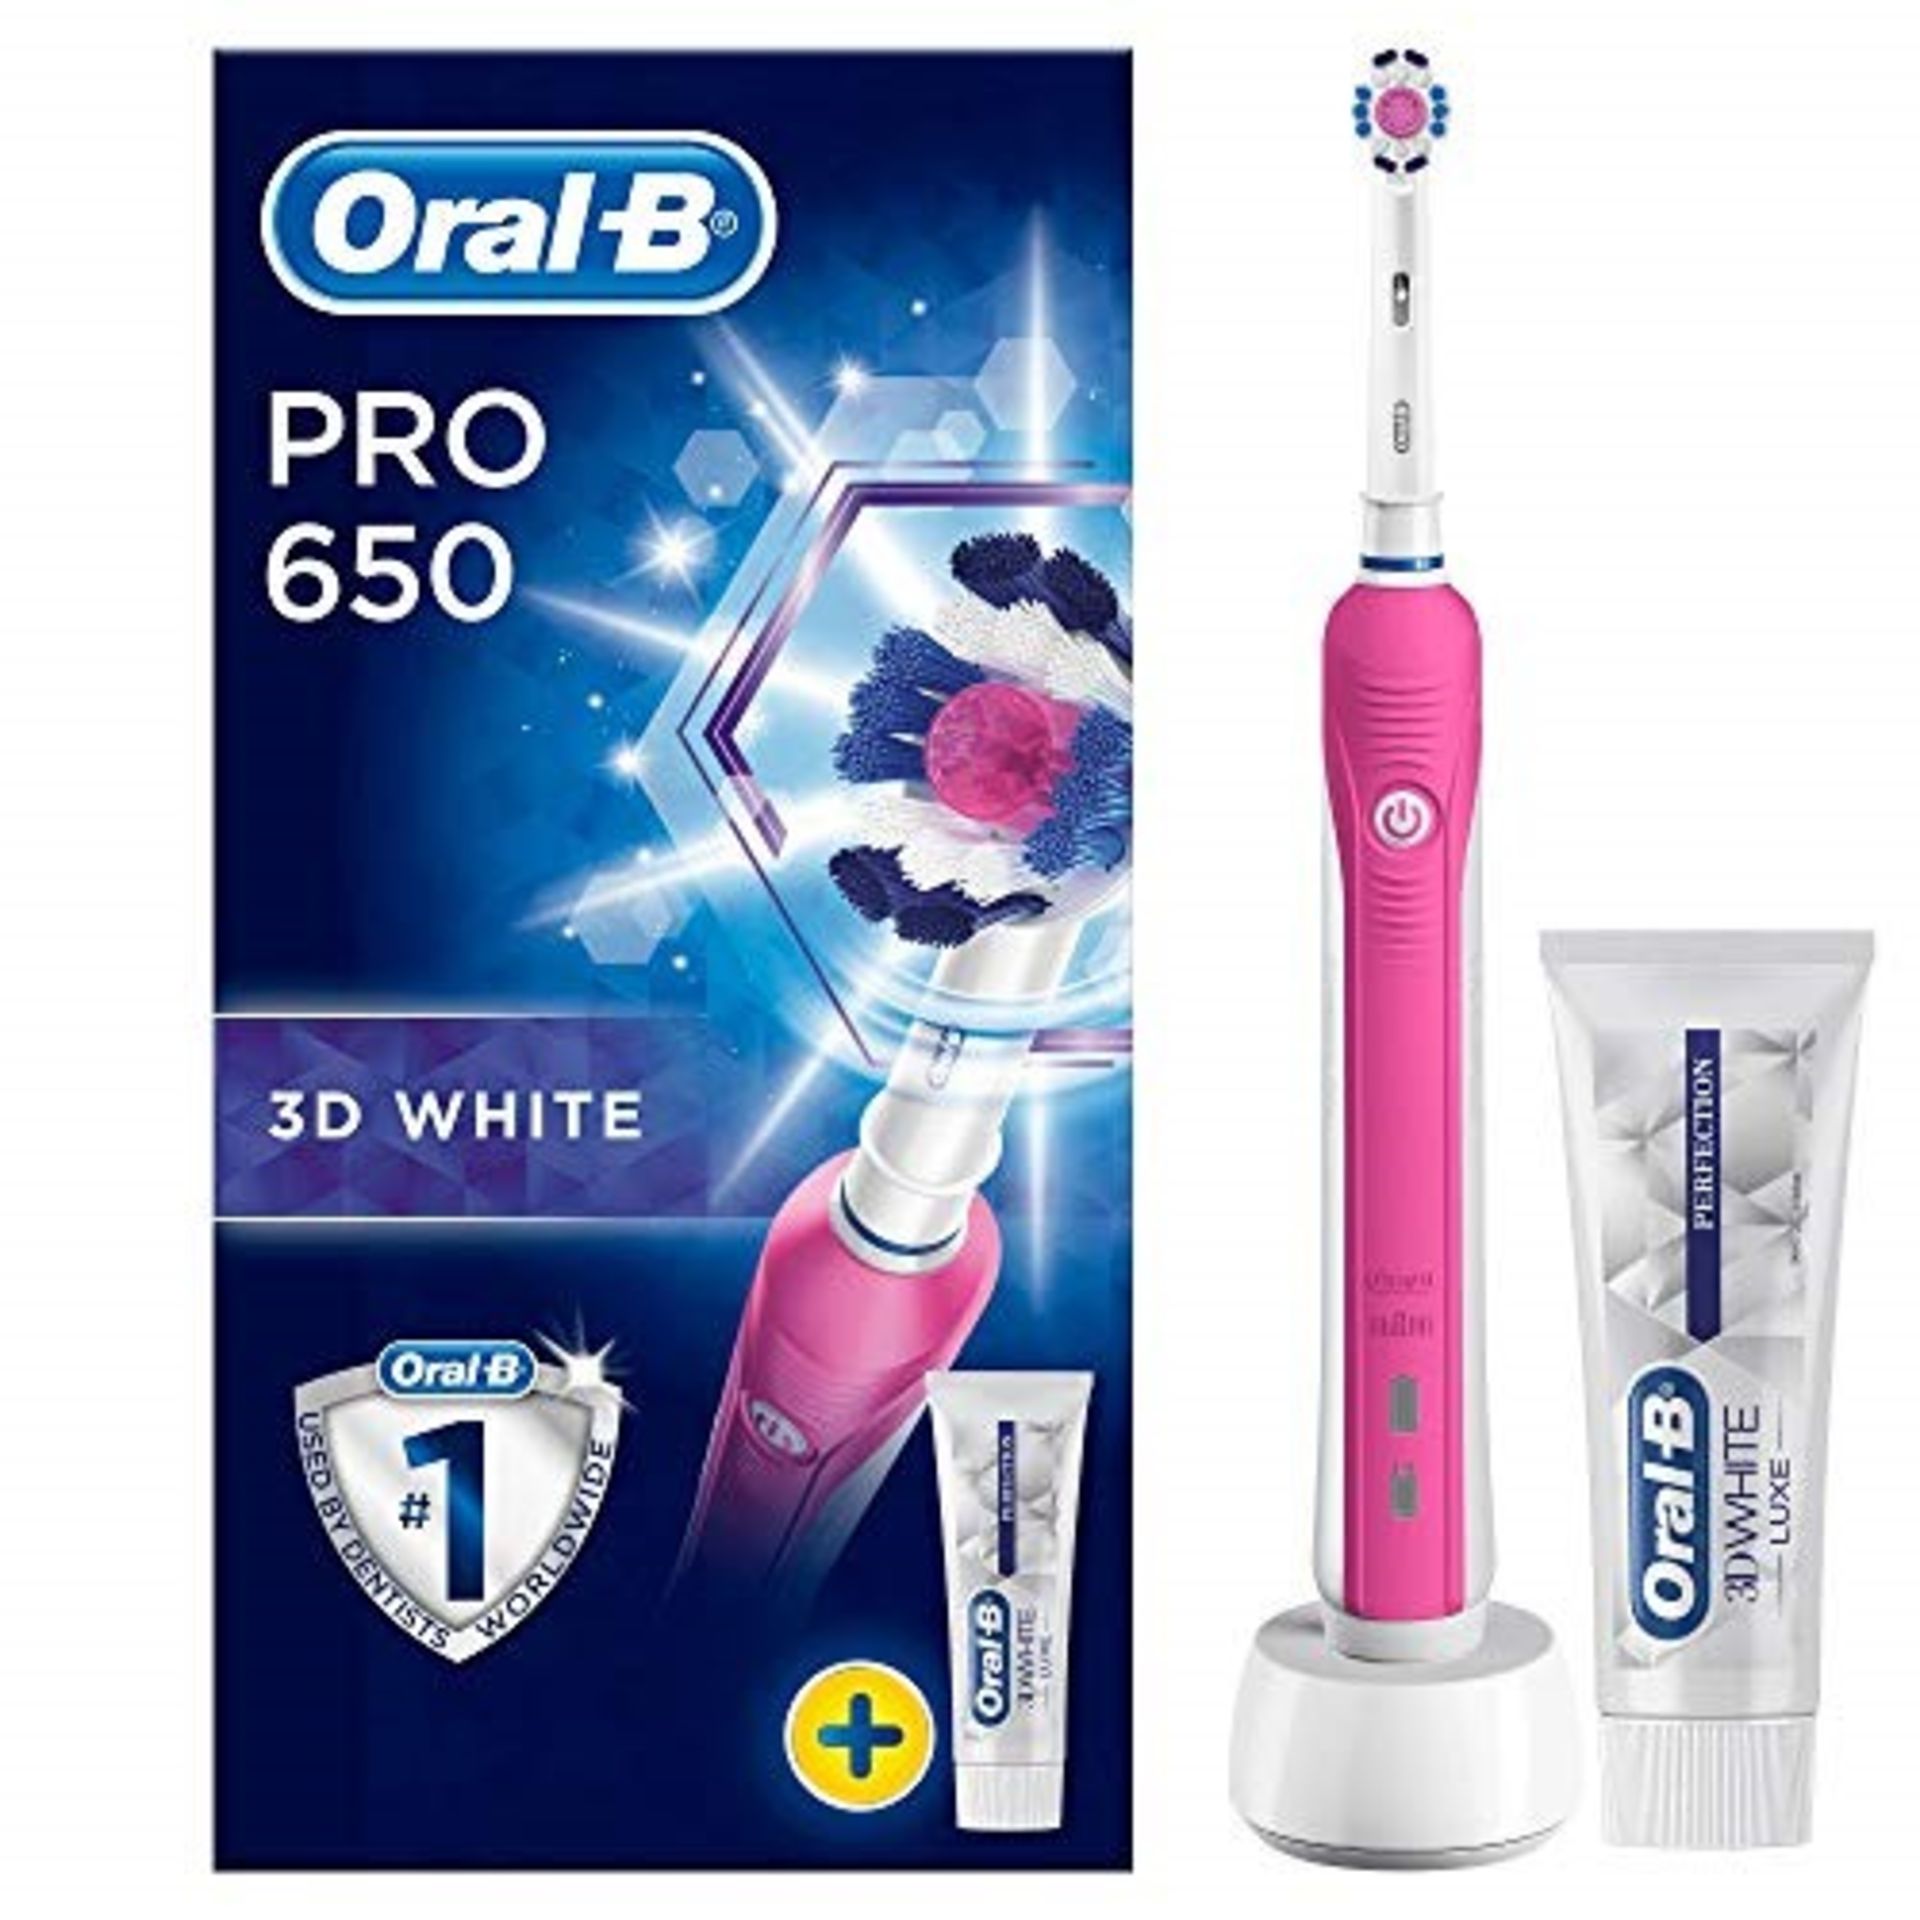 Oral-B Pro 650 3D White Electric Rechargeable To